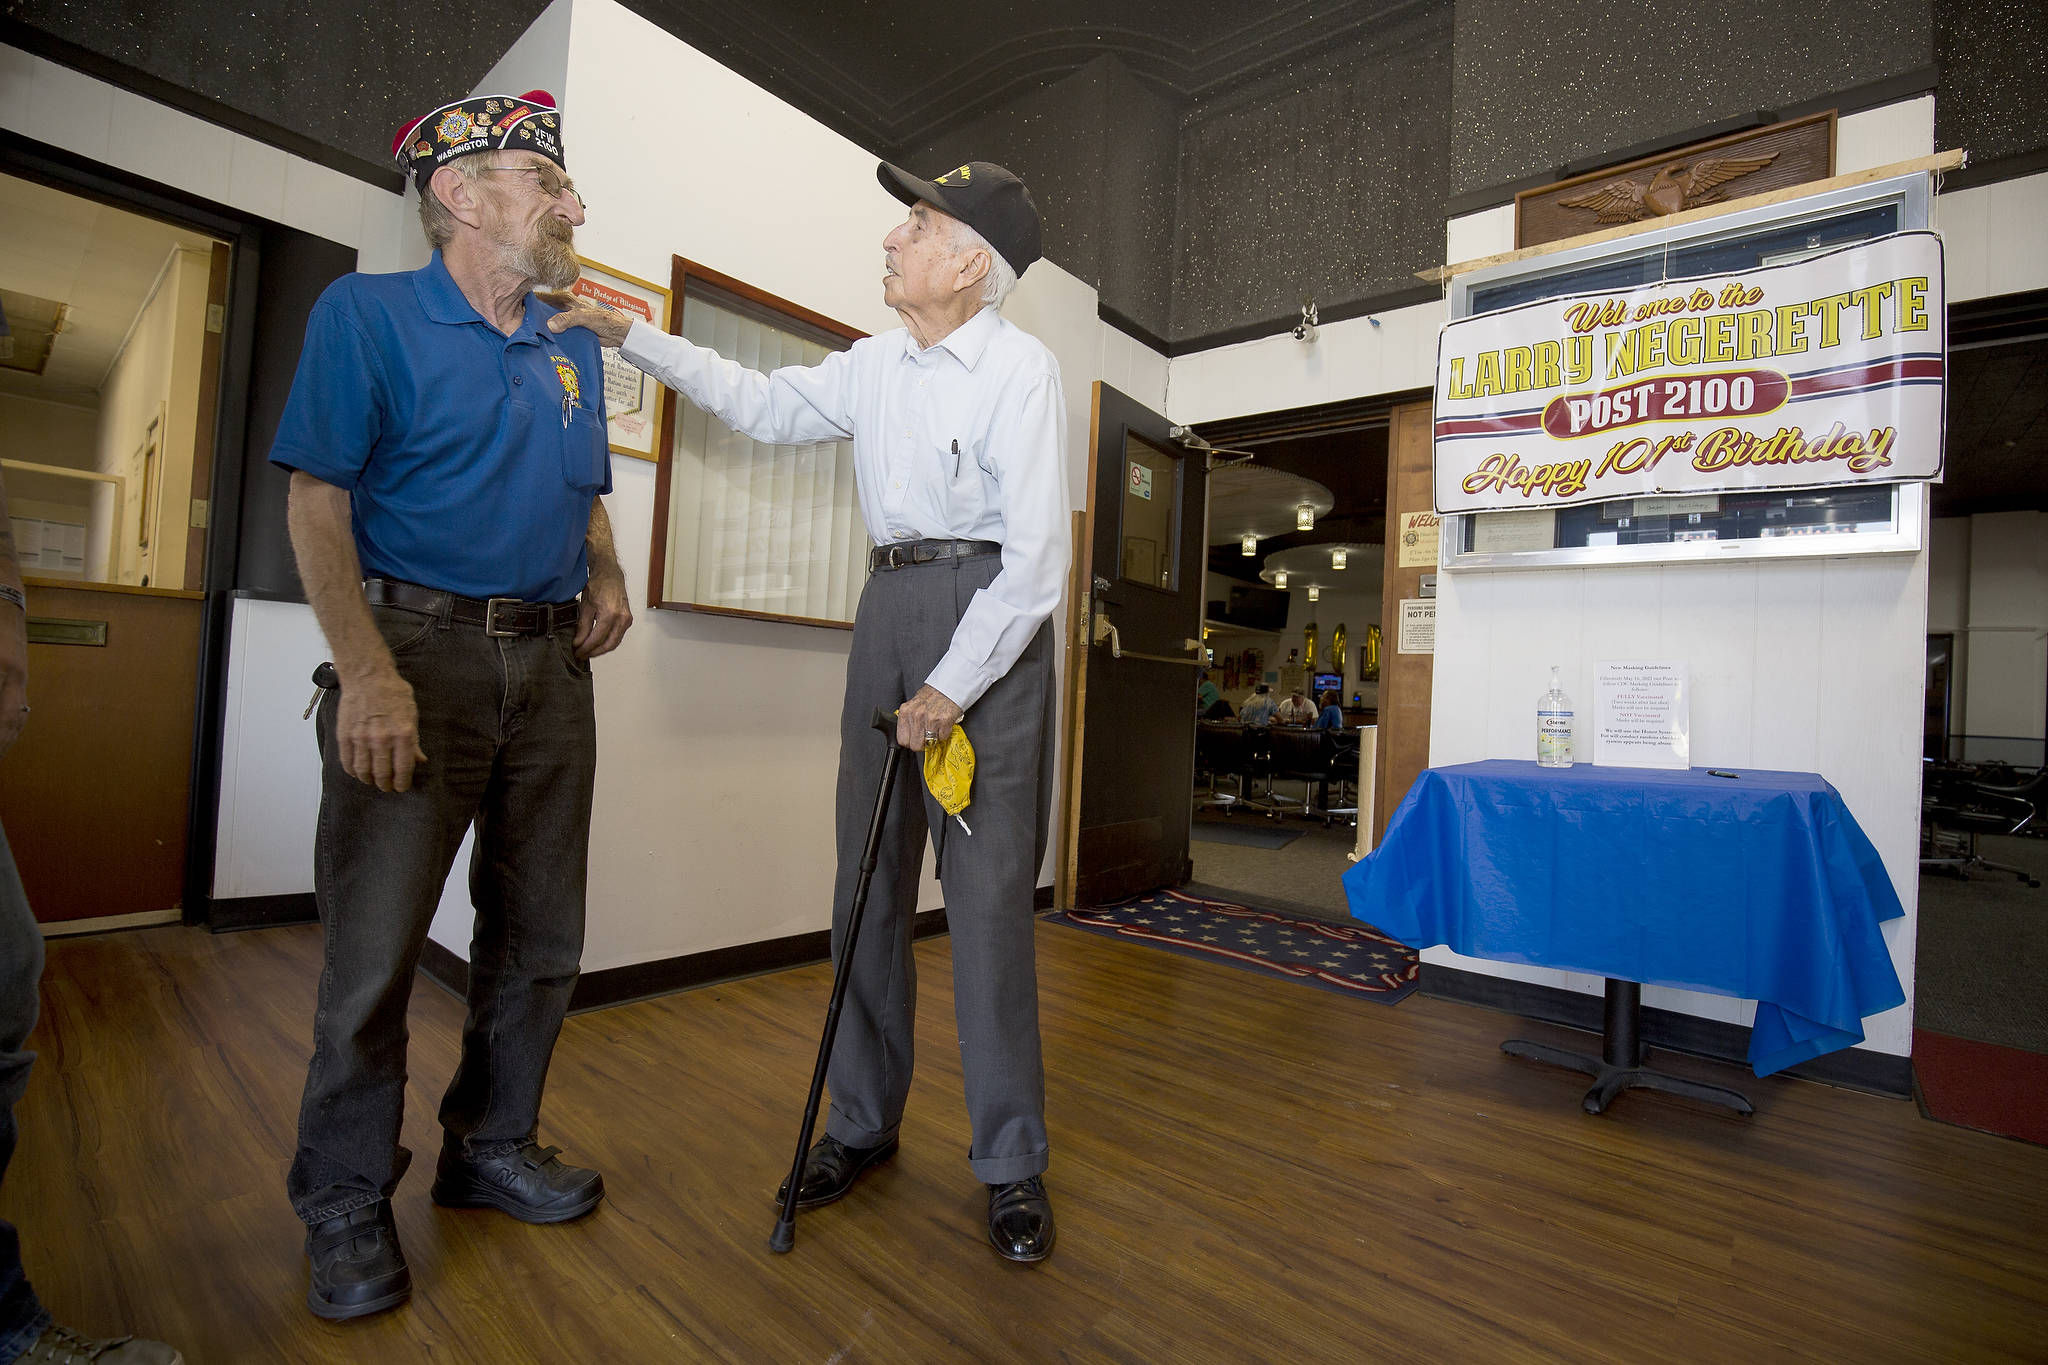 After showing off a few tap-dancing moves, Donald Wischmann (left) gets a little teasing from World War II veteran Larry Negrette, who was celebrating his 101st birthday at the Everett VFW Post on Tuesday. (Andy Bronson / The Herald)